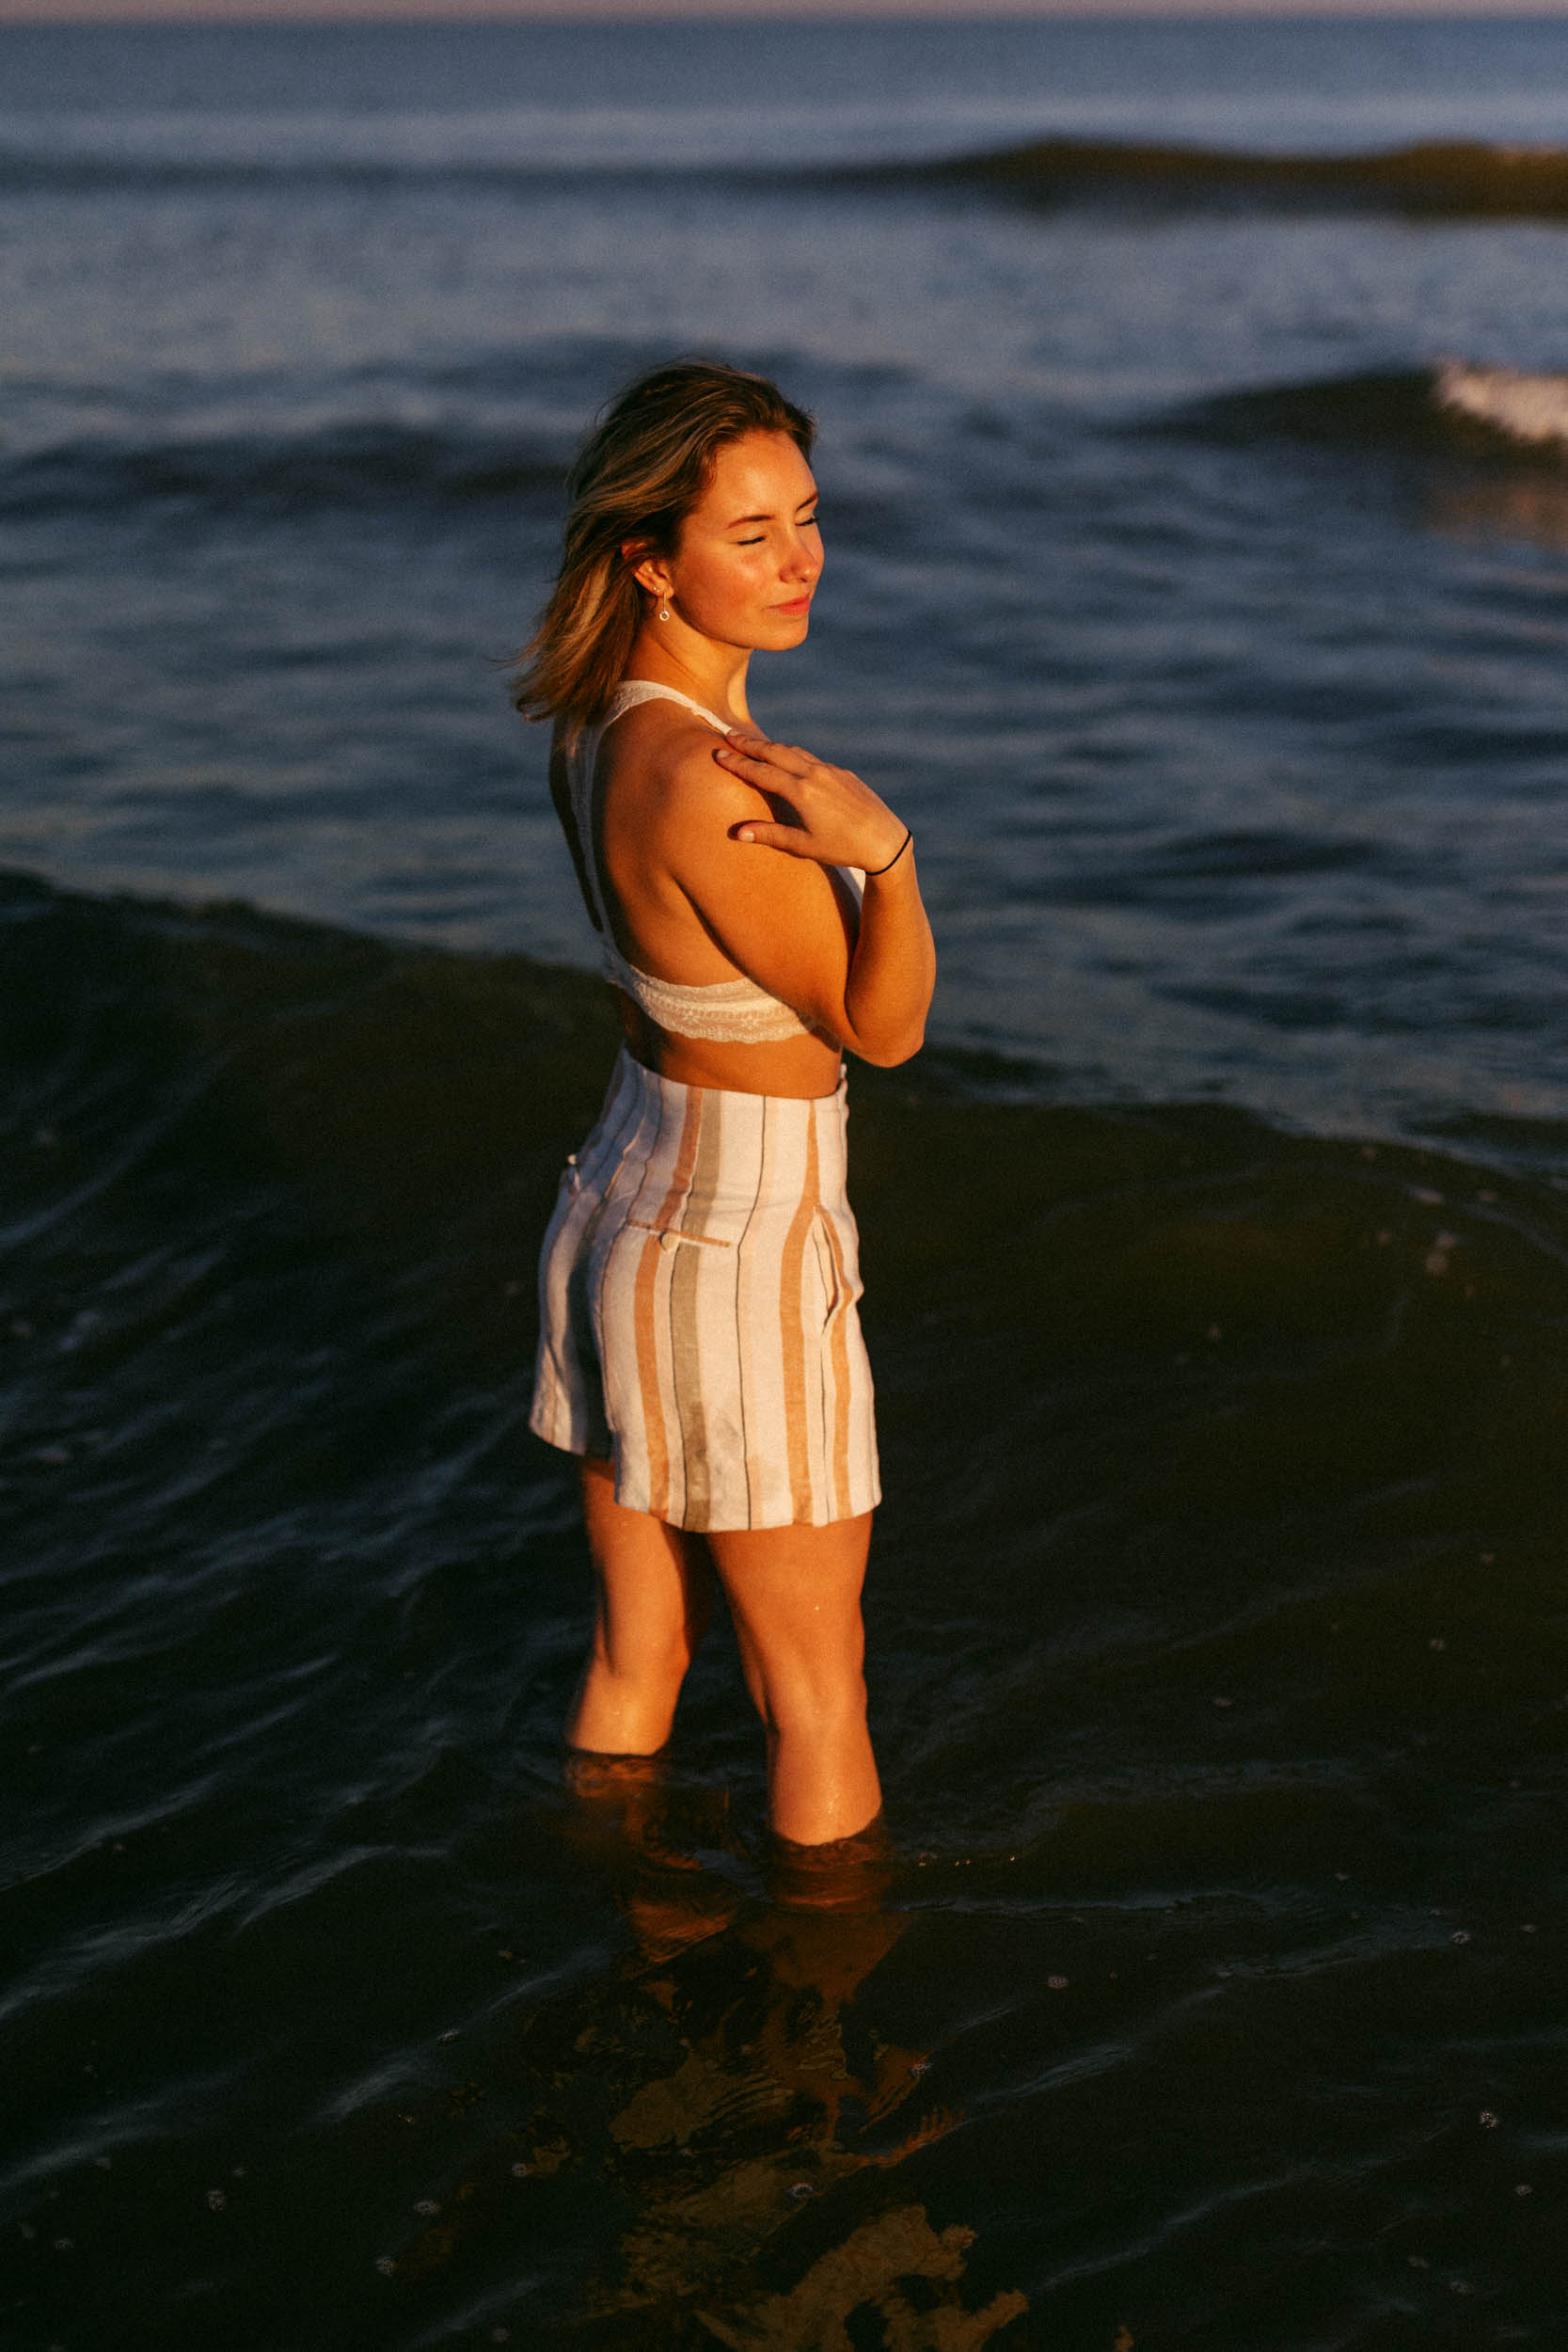 A woman standing in the ocean, dressed in a striped top and shorts, captured in a beautiful beach photo.